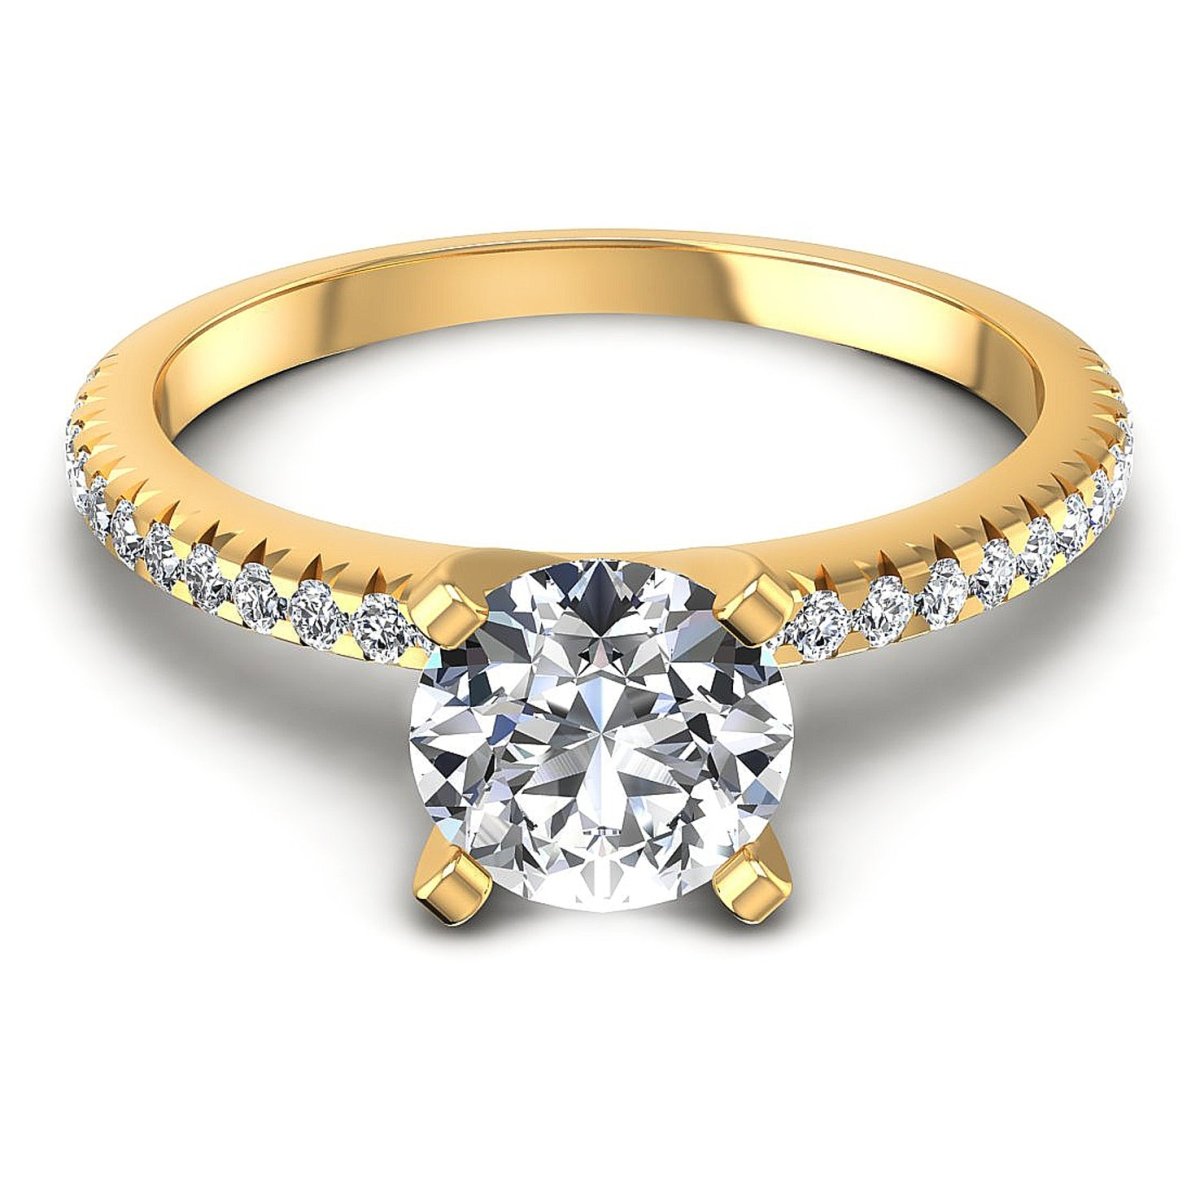 Rare 1.00CT Round Cut Diamond Engagement Ring in 14KT Yellow Gold - Primestyle.com